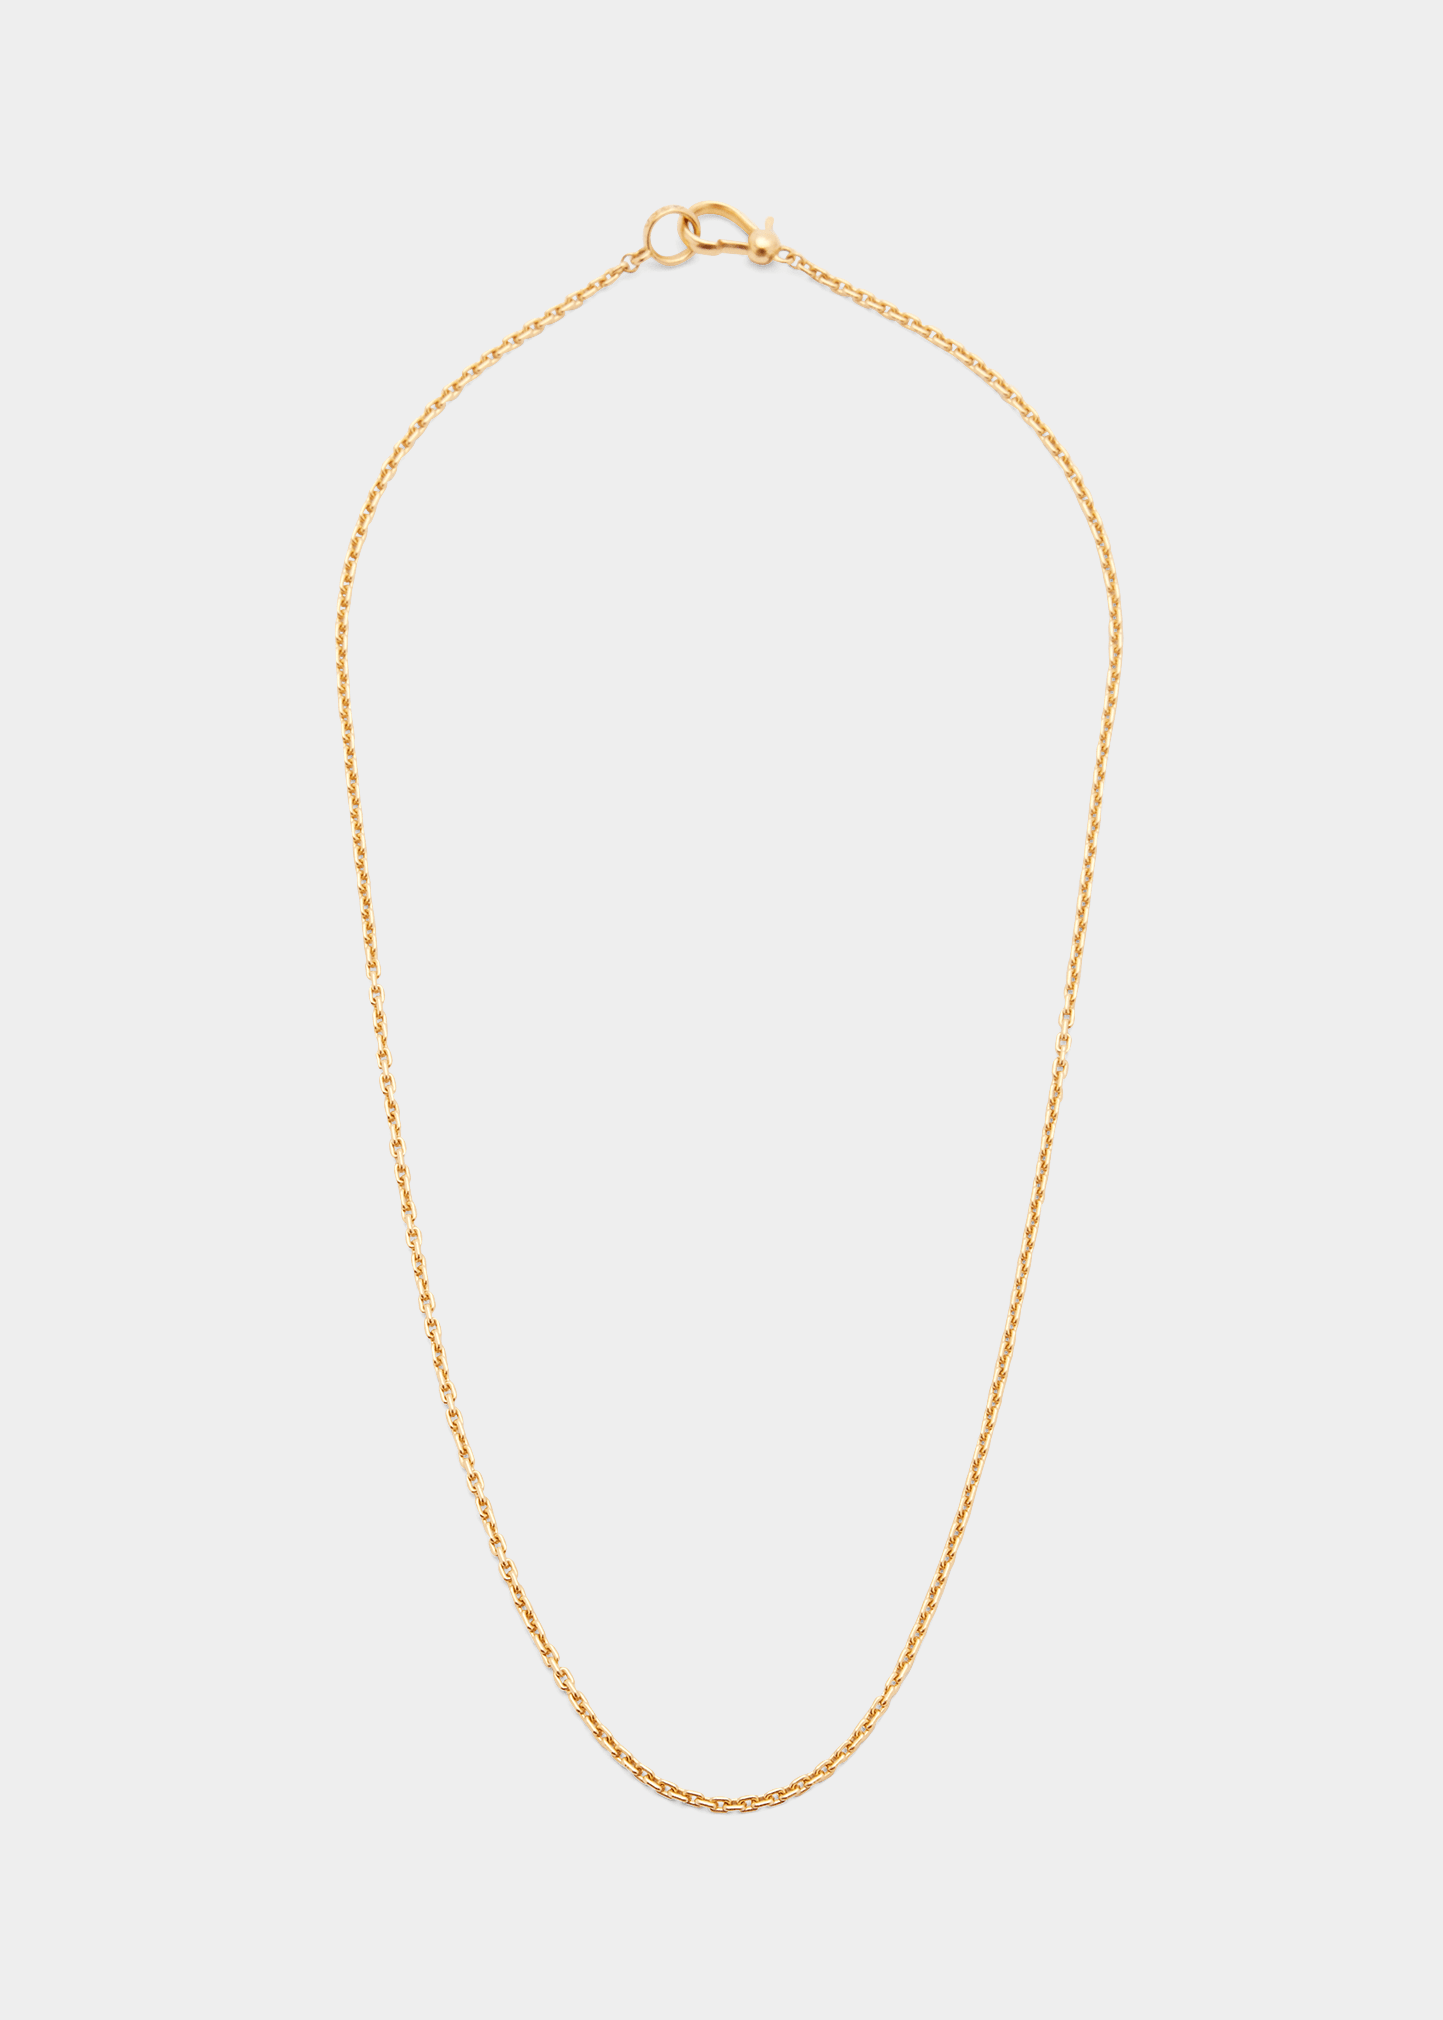 Wild Child Chain Necklace in Yellow Gold